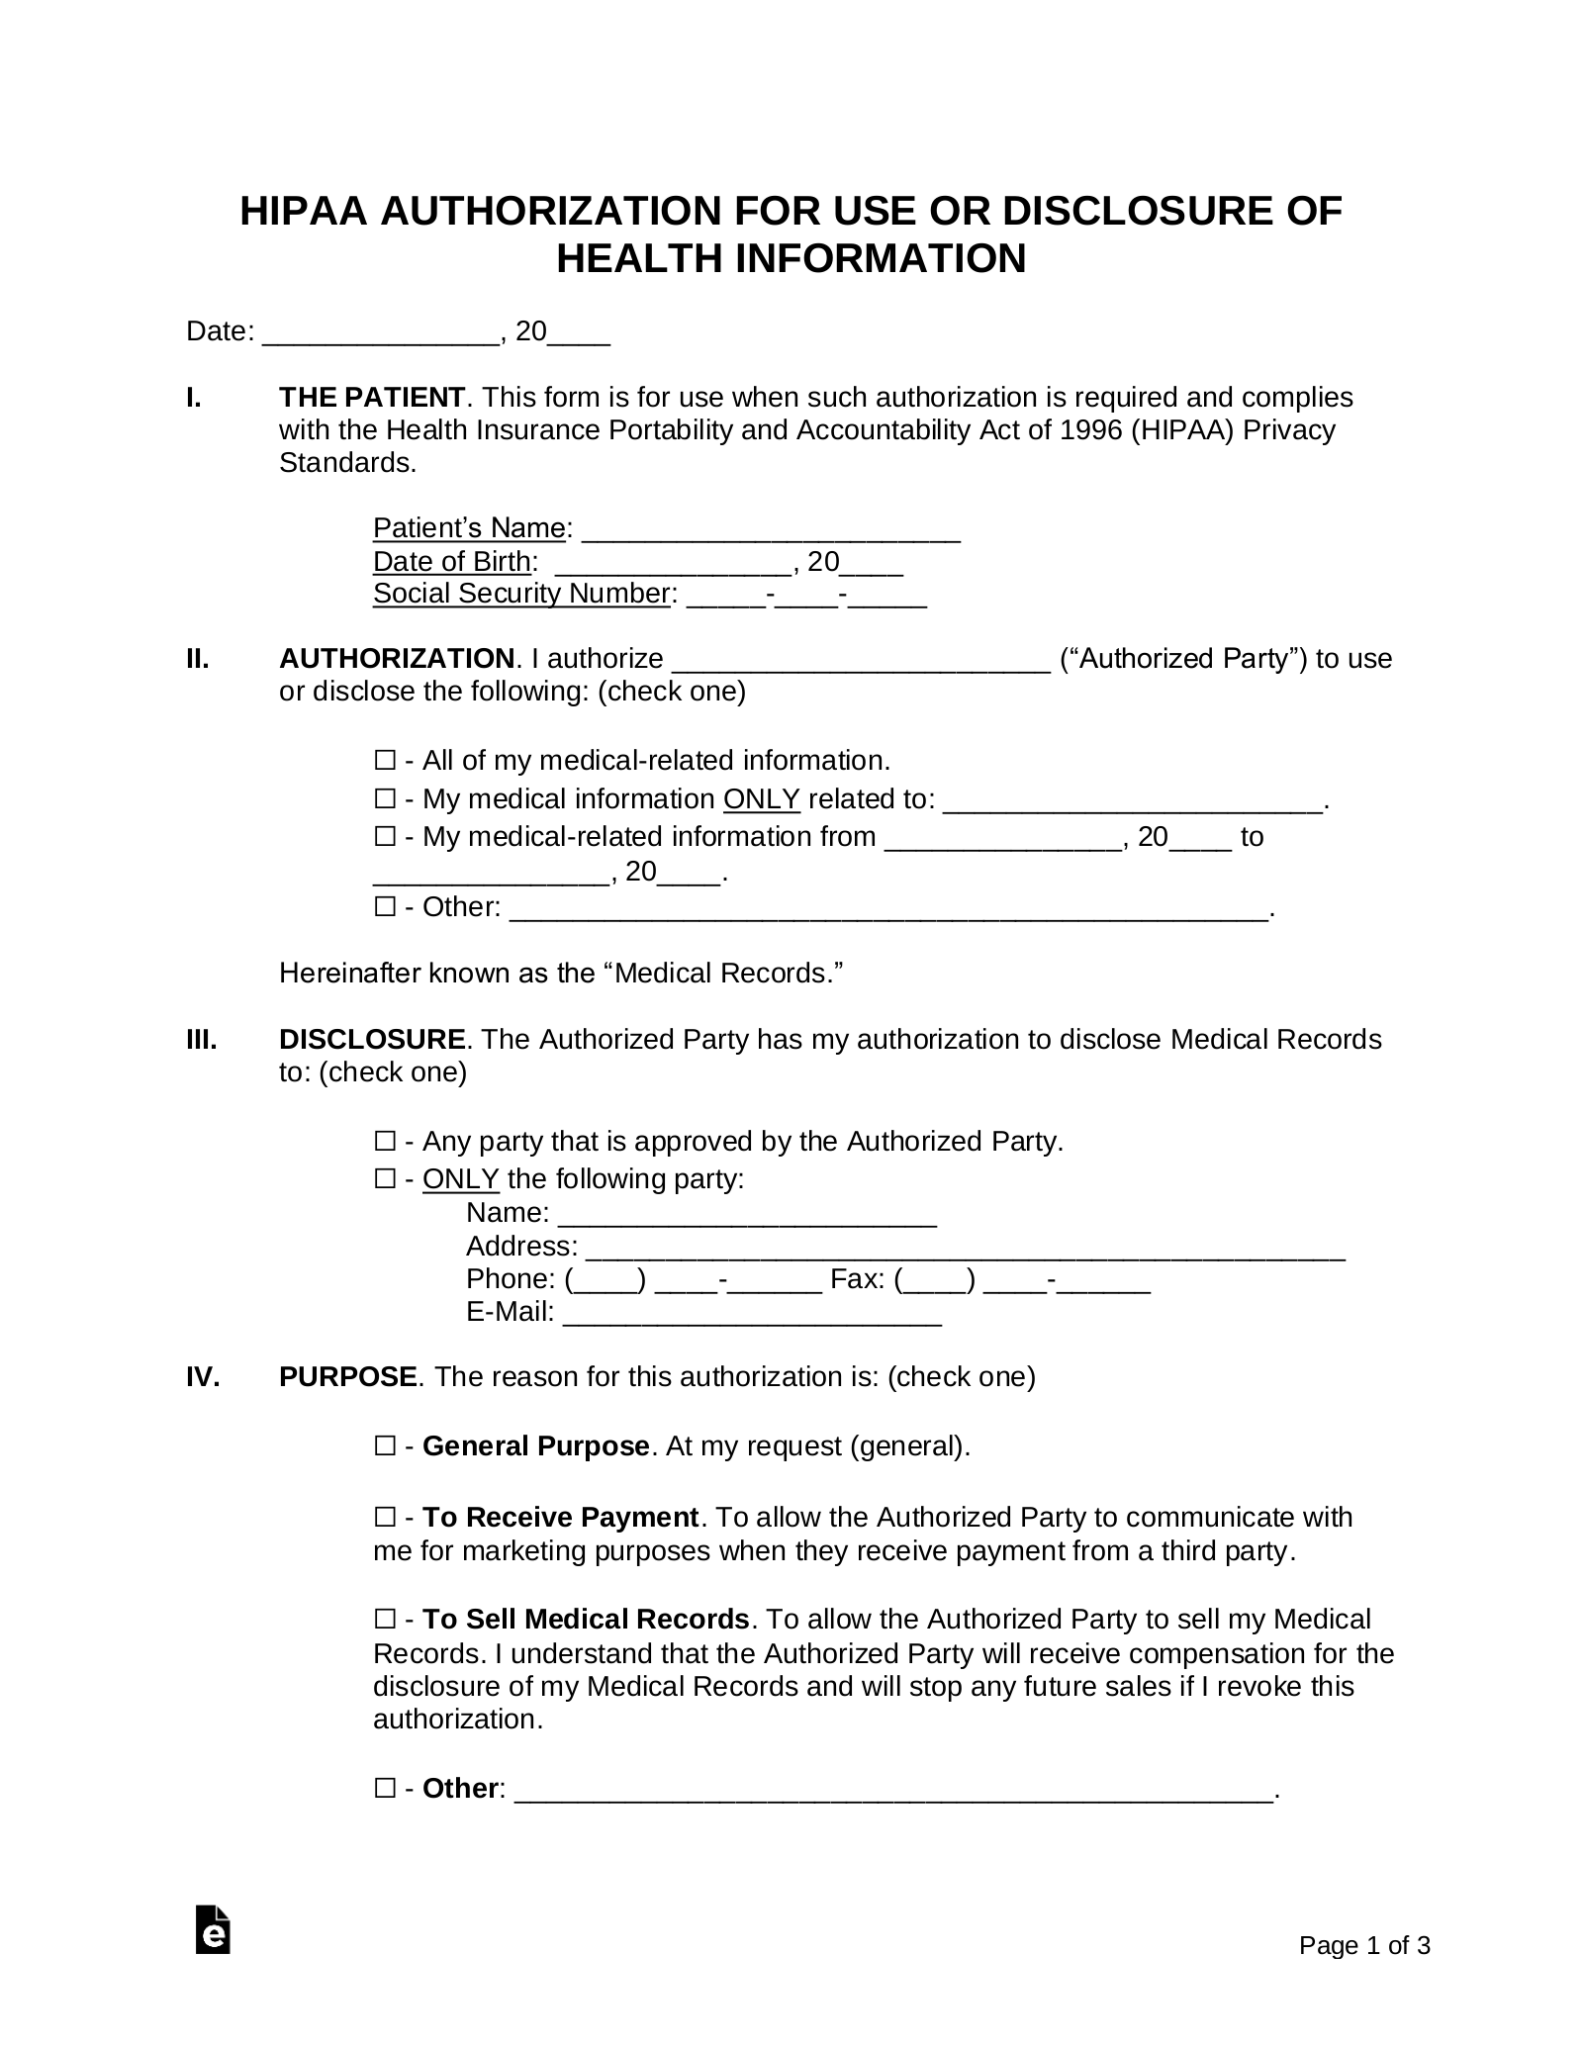 hipaa-form-960-fillable-spanish-printable-forms-free-online